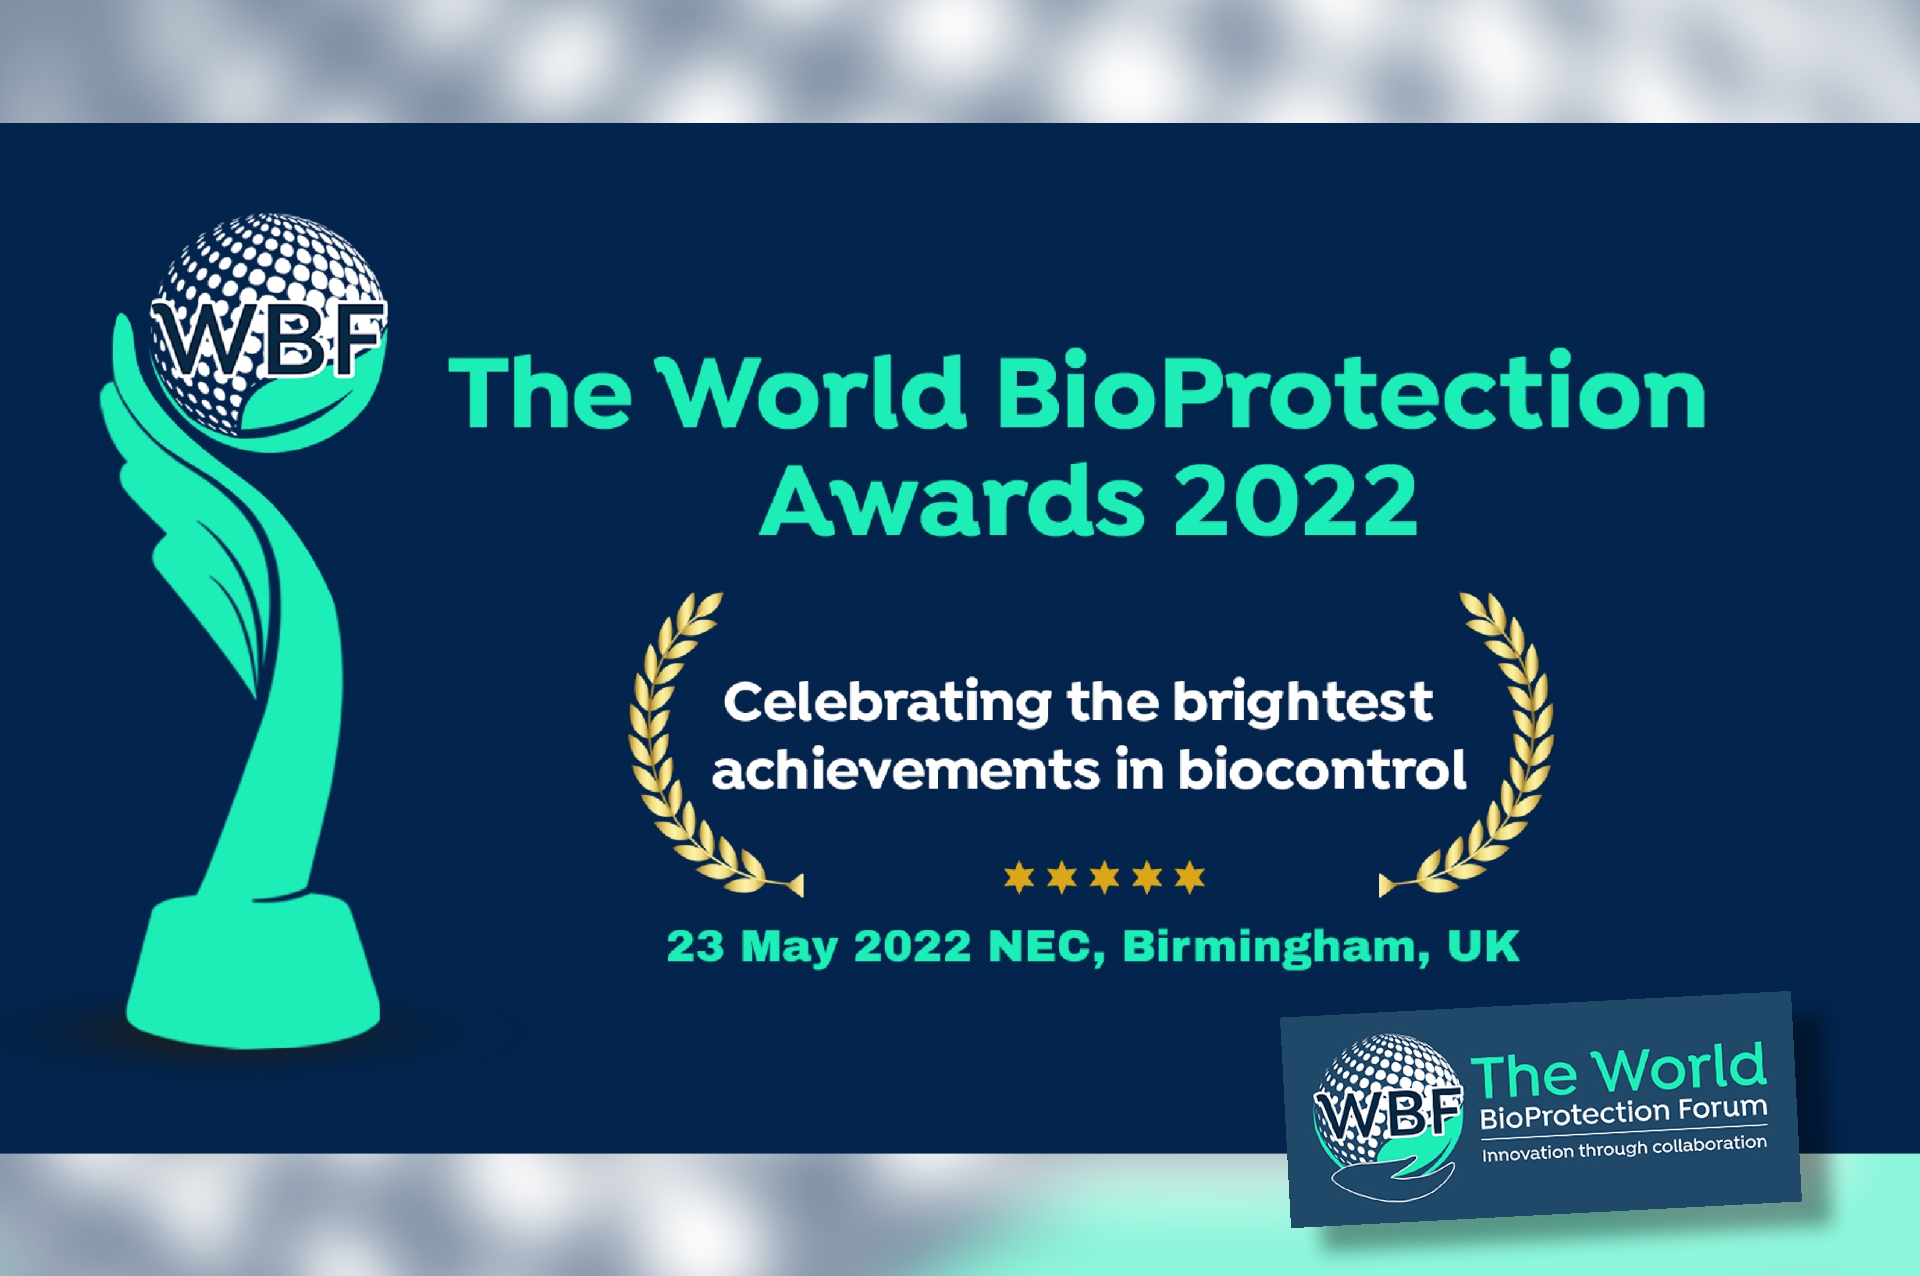 The World Bioprotection Forum Summit and Awards 2022